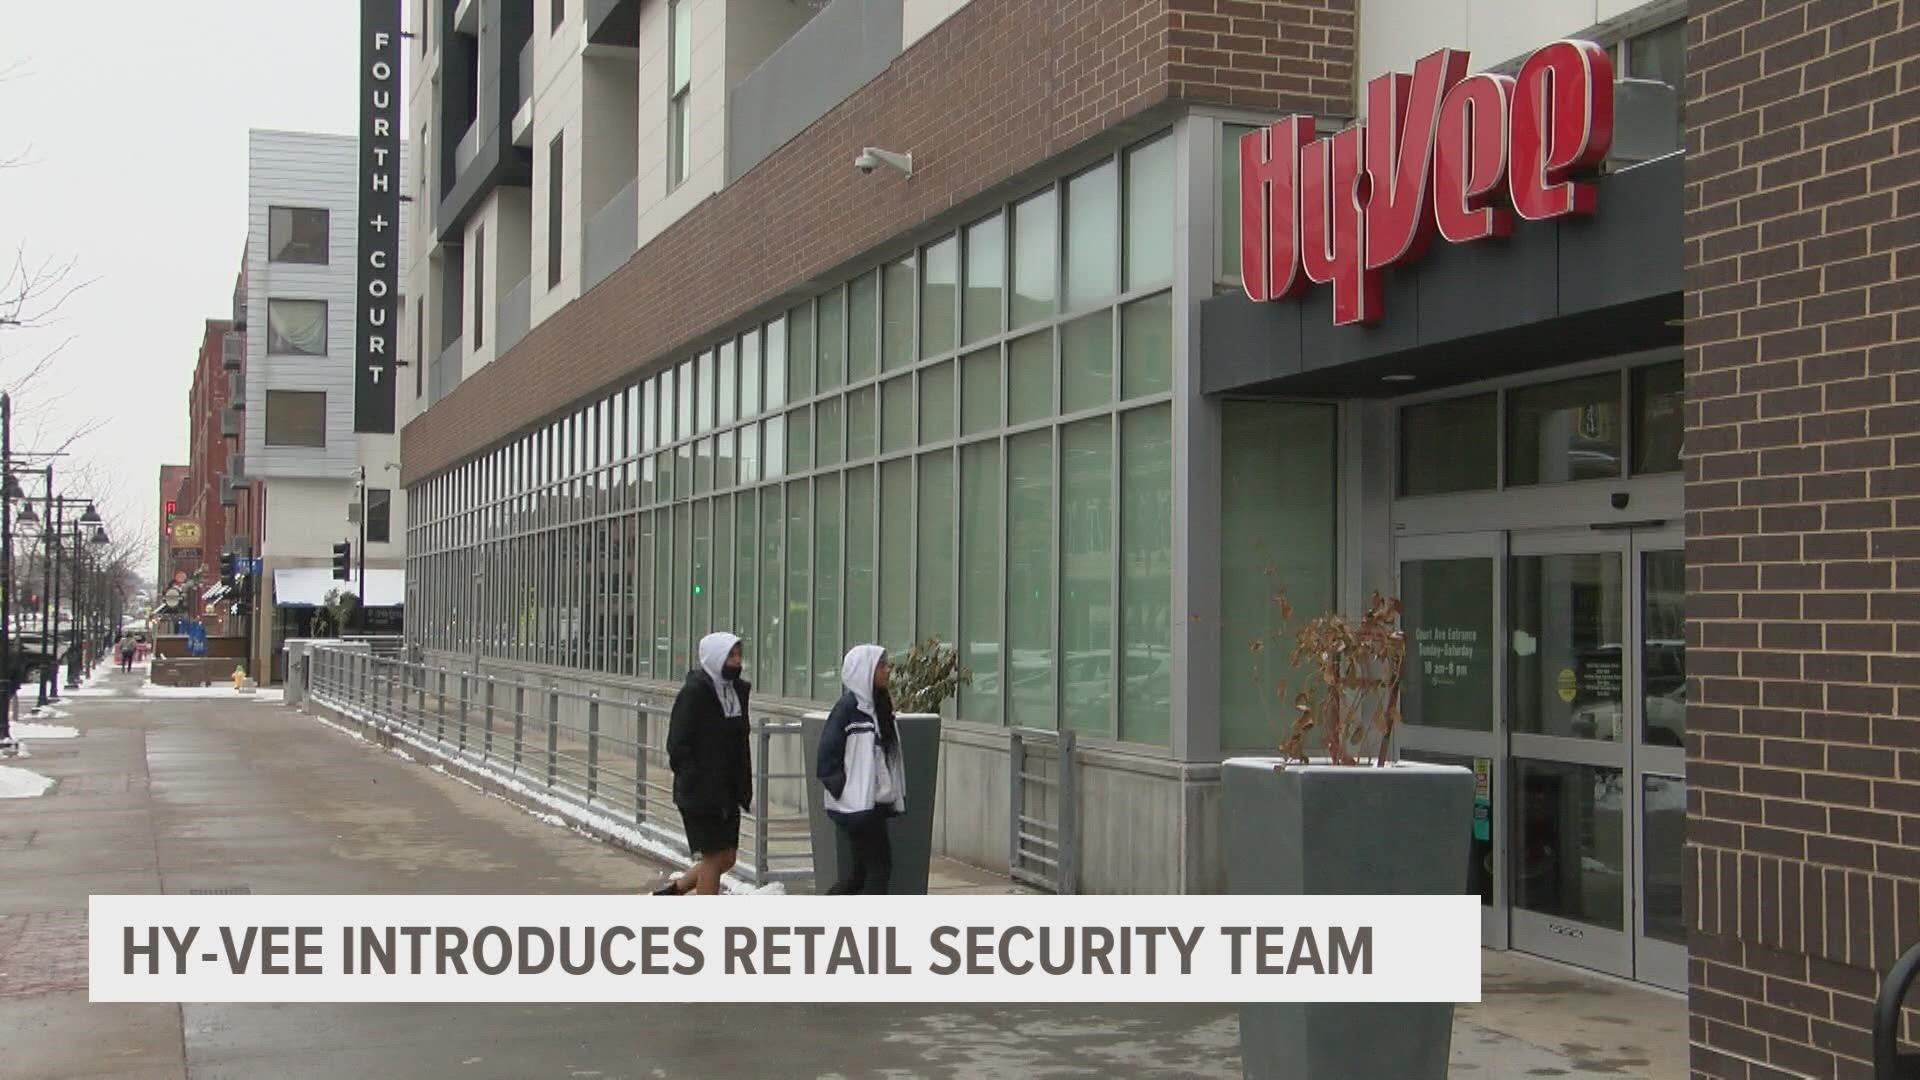 Hy-Vee says the officers have been through training that was designed by Hy-Vee security leaders "alongside law enforcement partners."